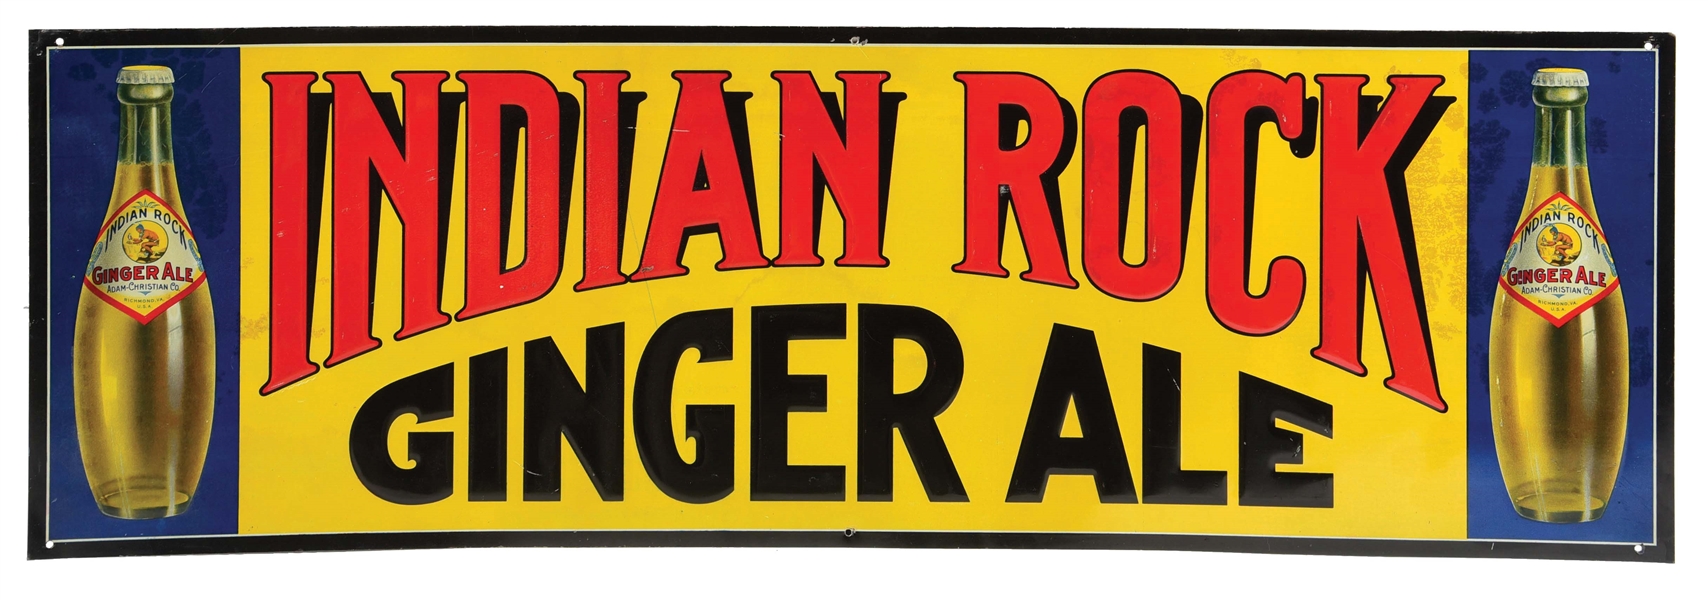 INDIAN ROCK GINGER ALE EMBOSSED TIN SIGN W/ DOUBLE BOTTLES GRAPHIC.